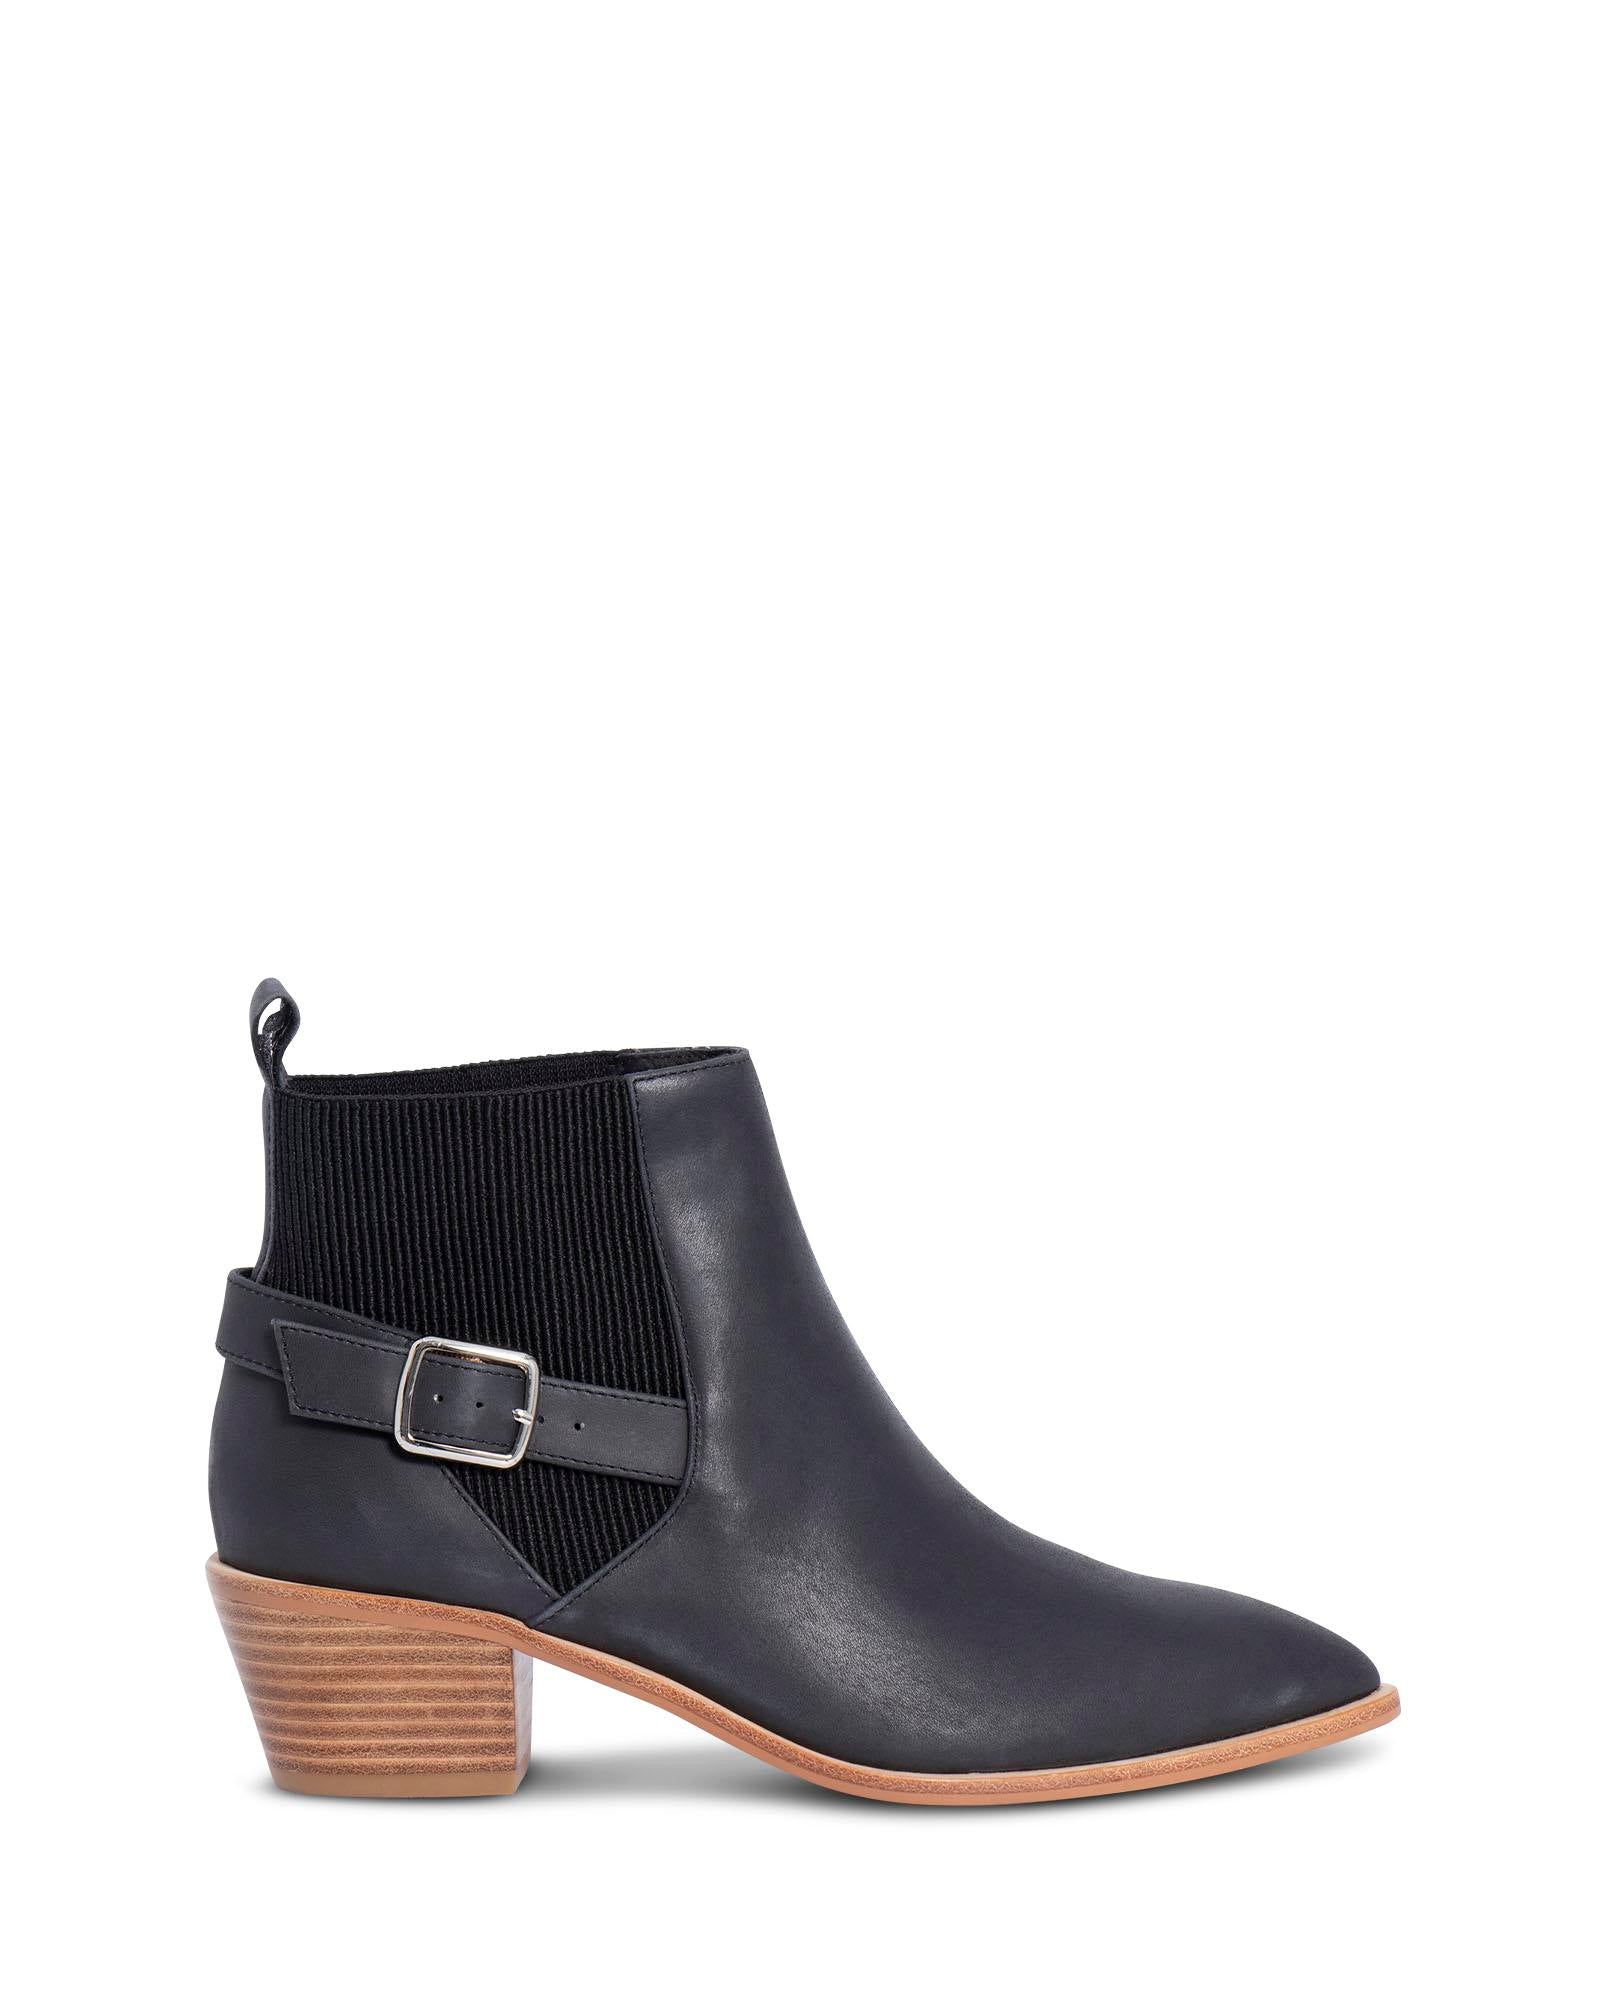 Jill Black 5.5cm Heel Ankle Boot with Elastic Gusset and Adjustable Square Gold Buckle 